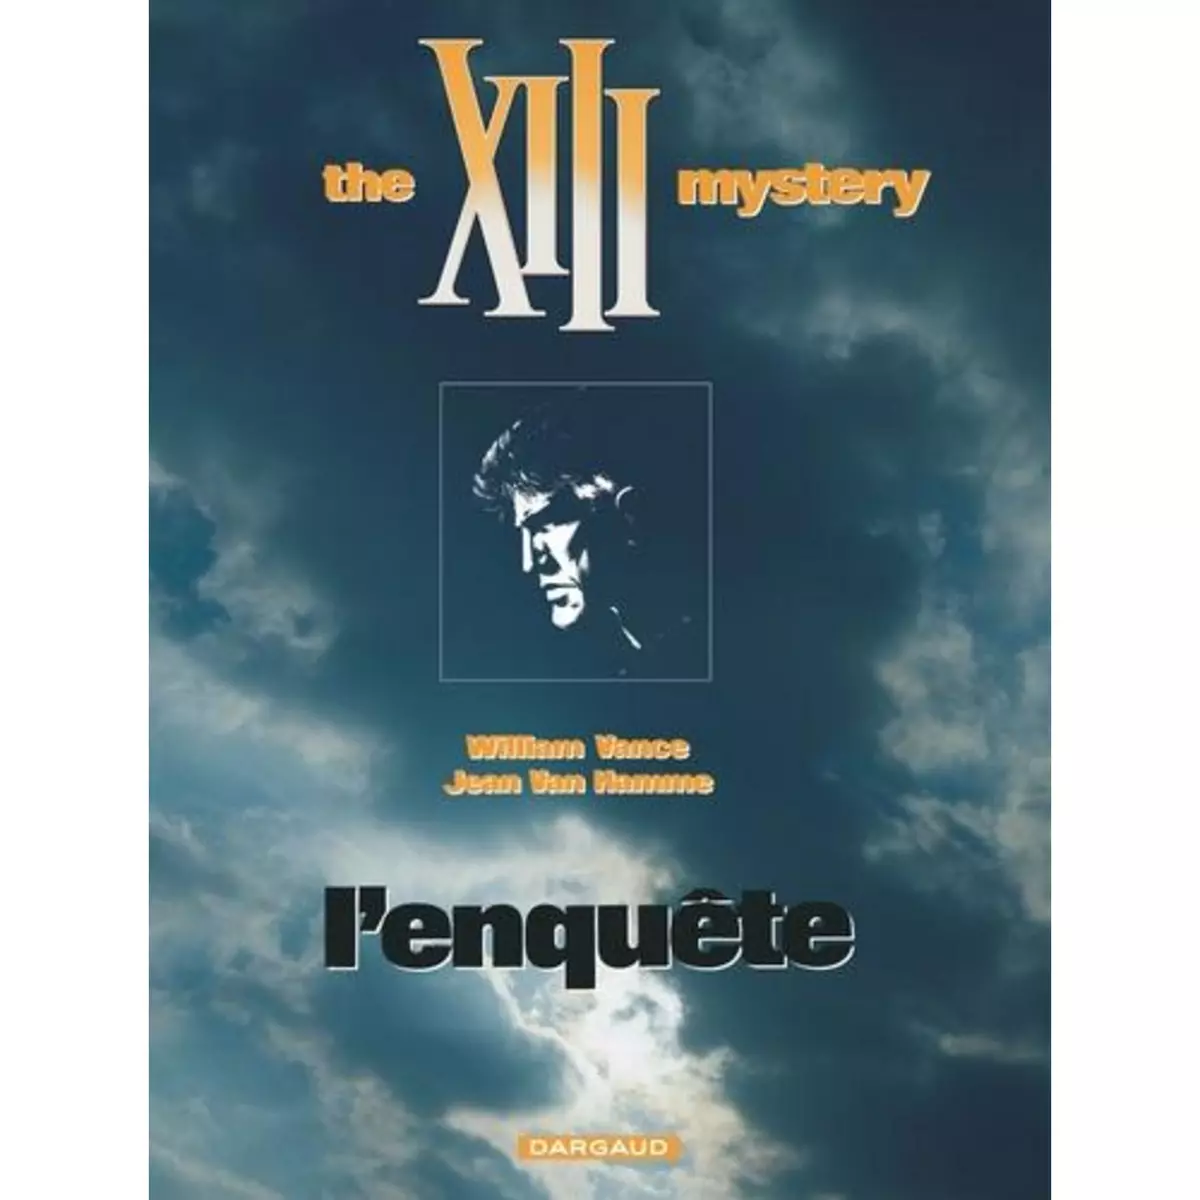  XIII TOME 13 : THE XIII MYSTERY. L'ENQUETE, Vance William